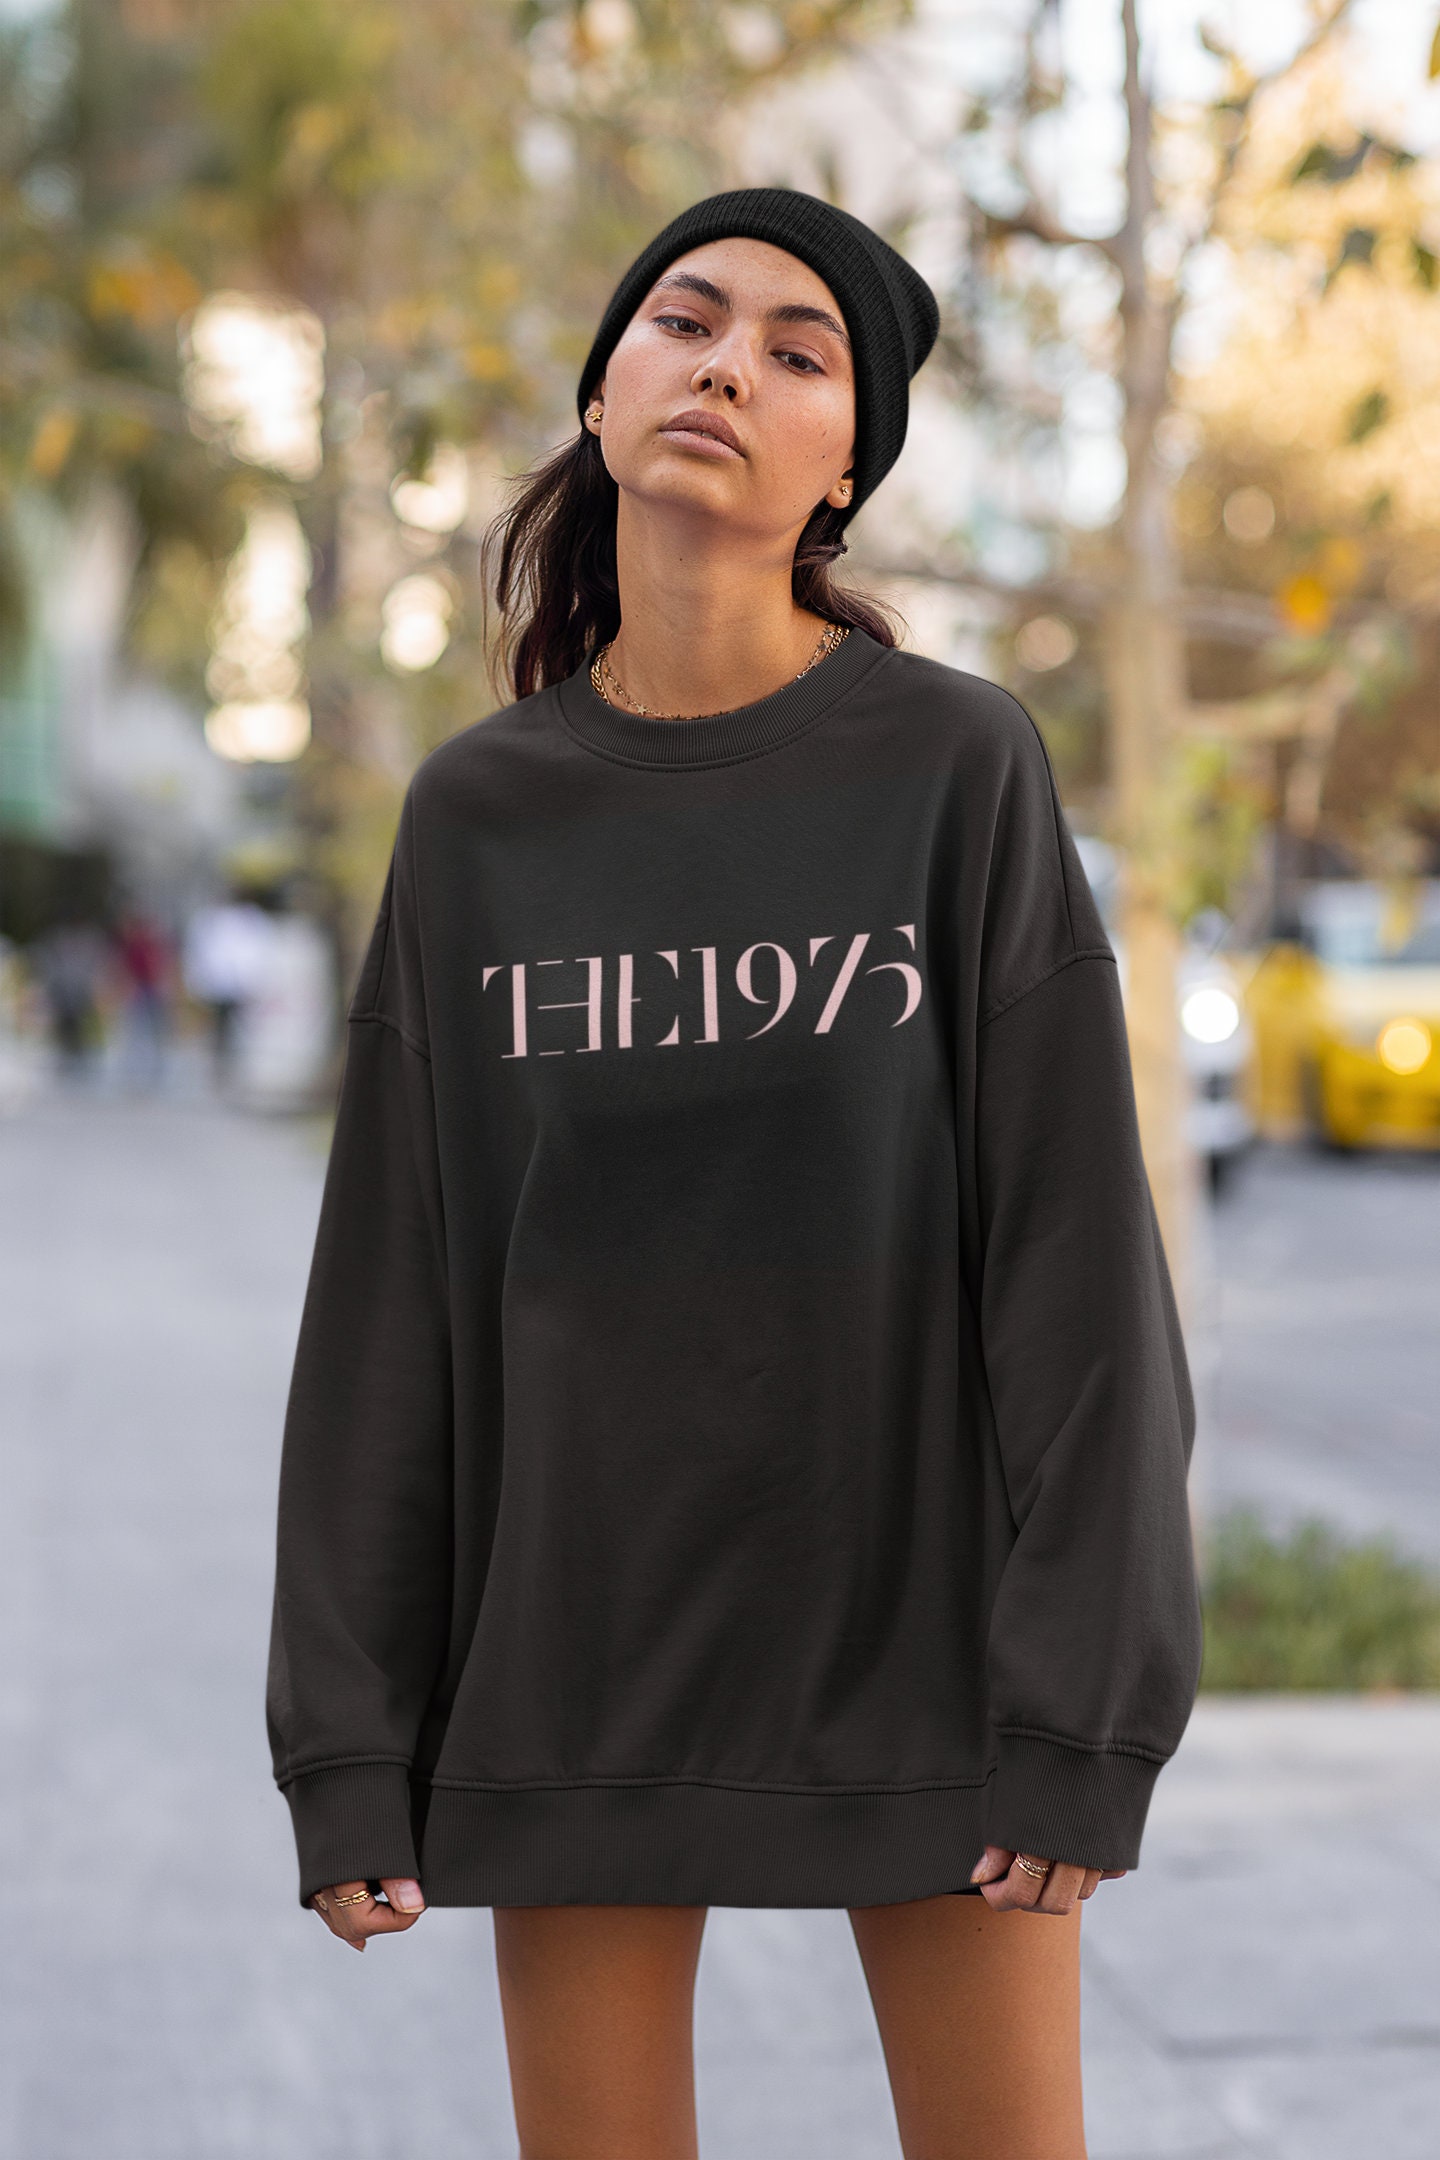 Discover The 1975 Logo Shirt, When We Are Together Sweatshirt, The 1975 Shirt, The 1975 Merch, The 1975 Tour